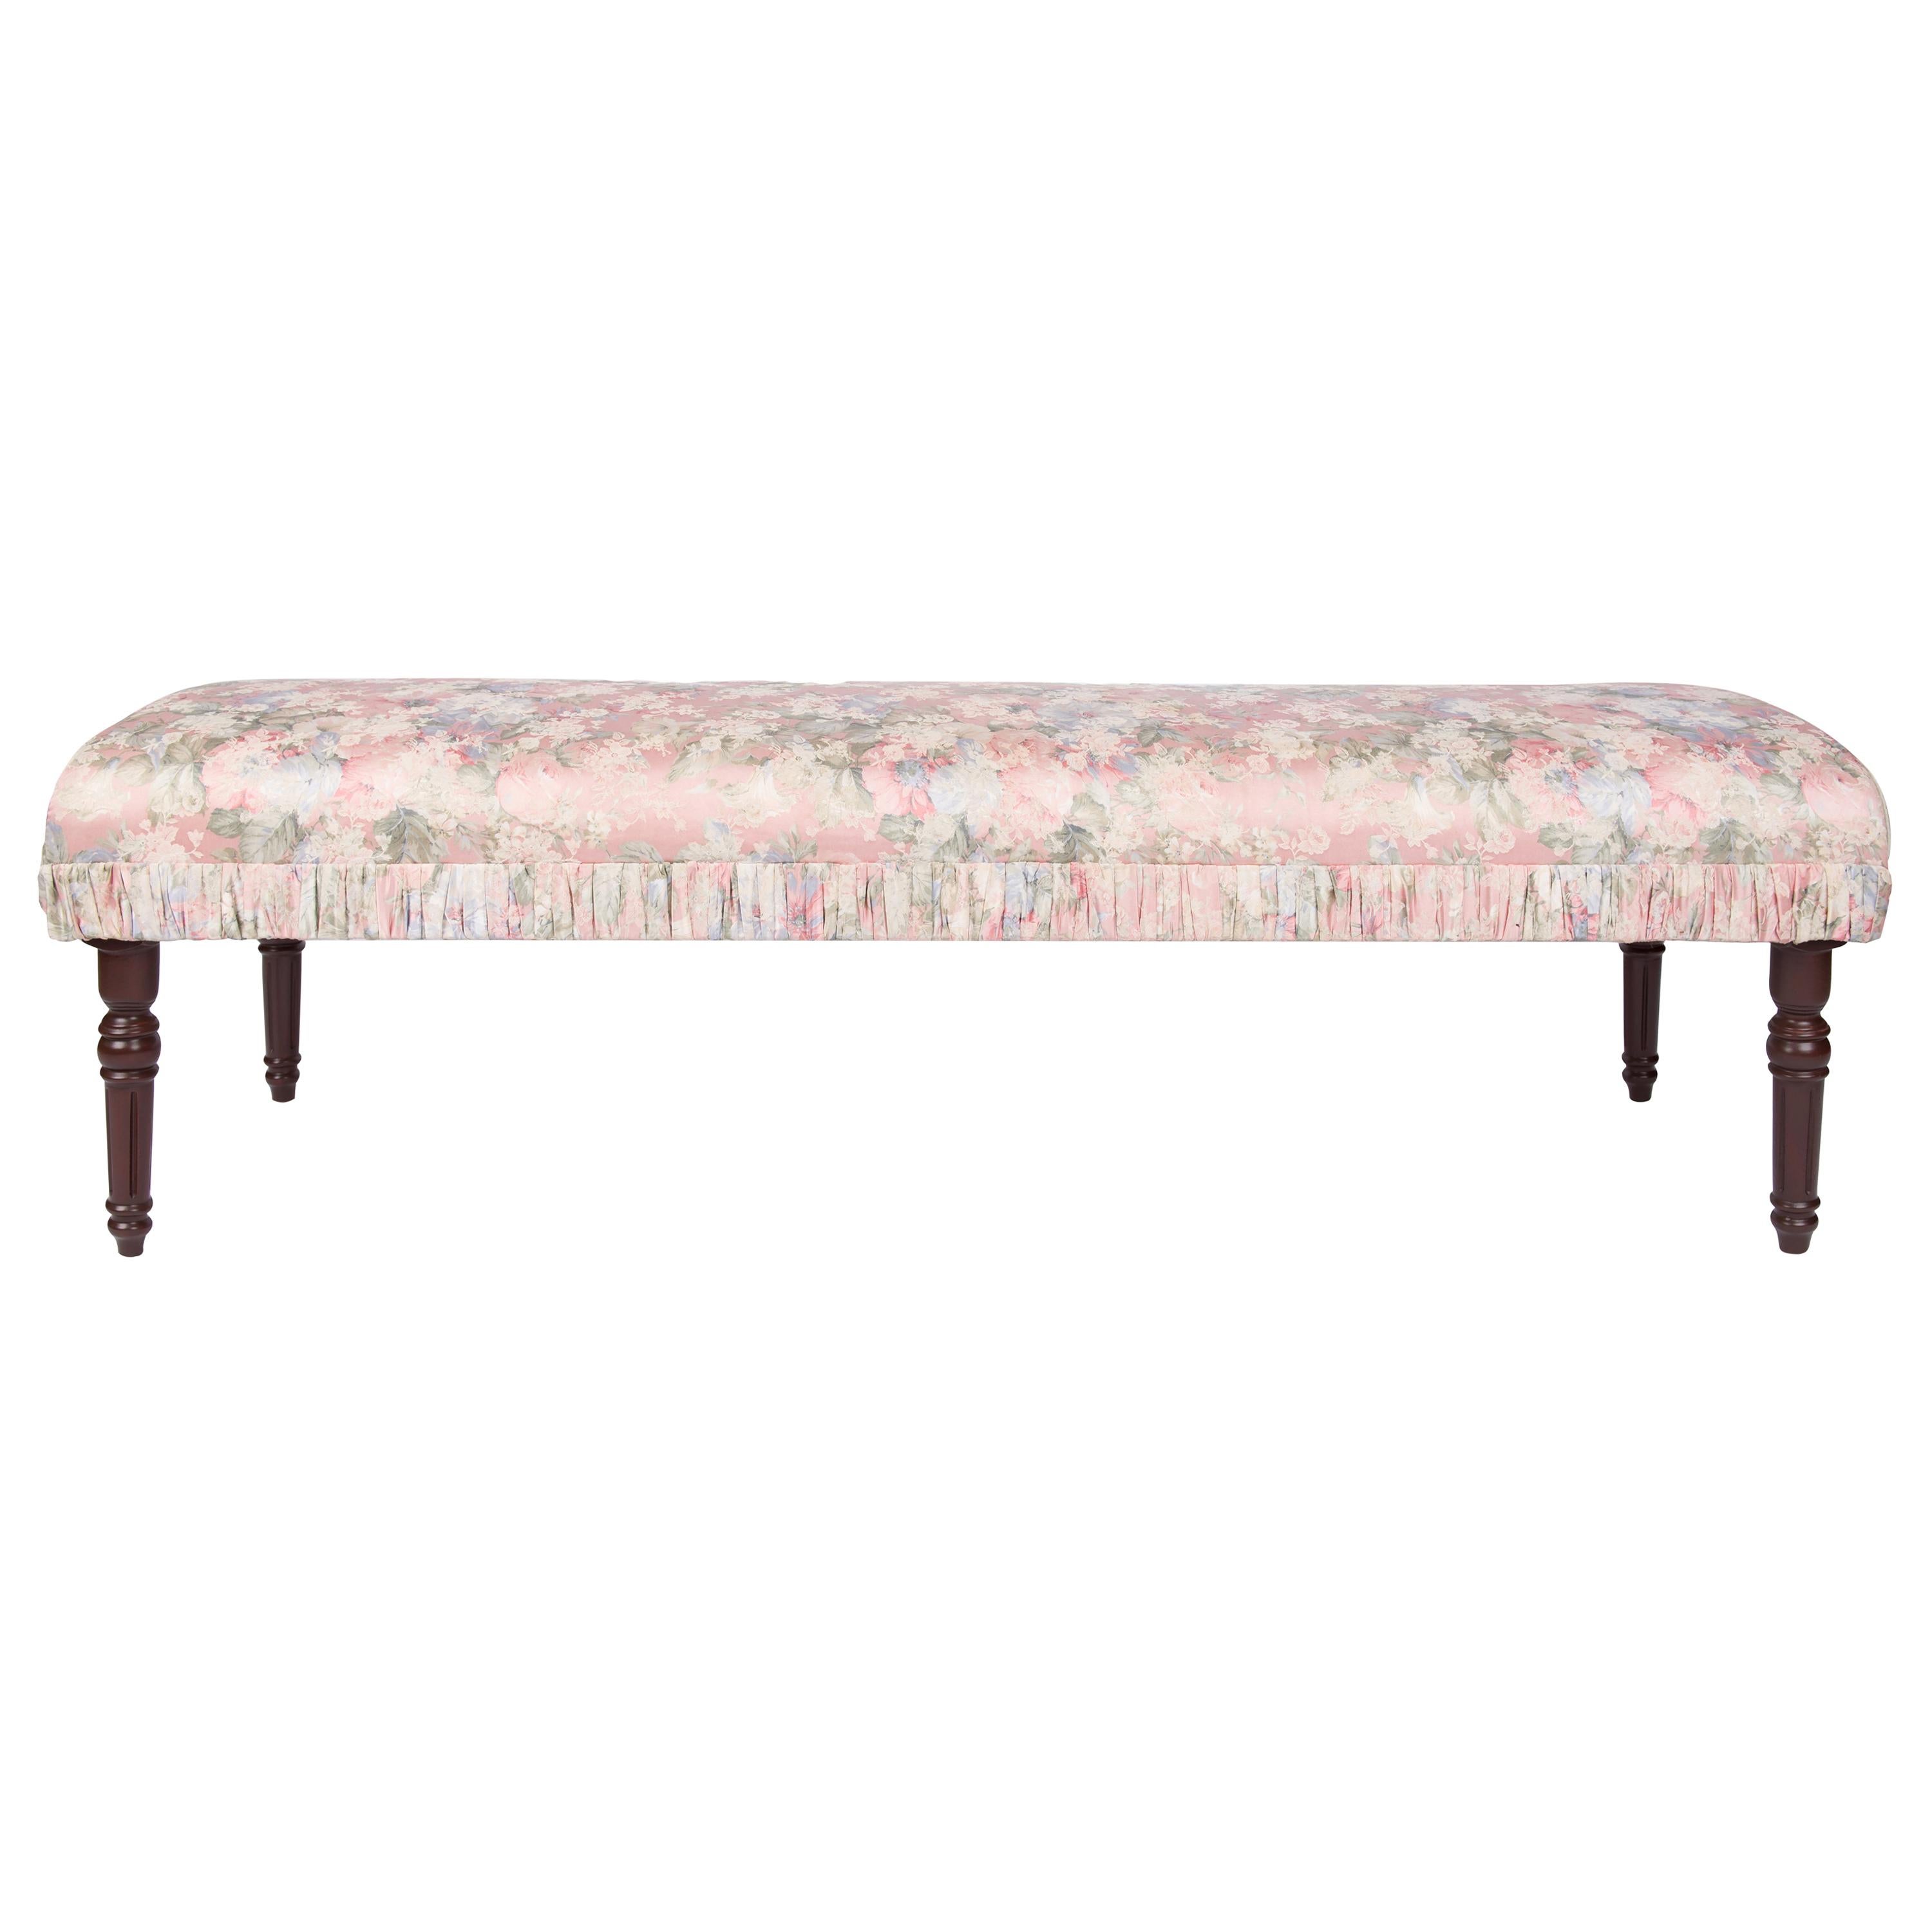 19th Century Regency Style Bench For Sale